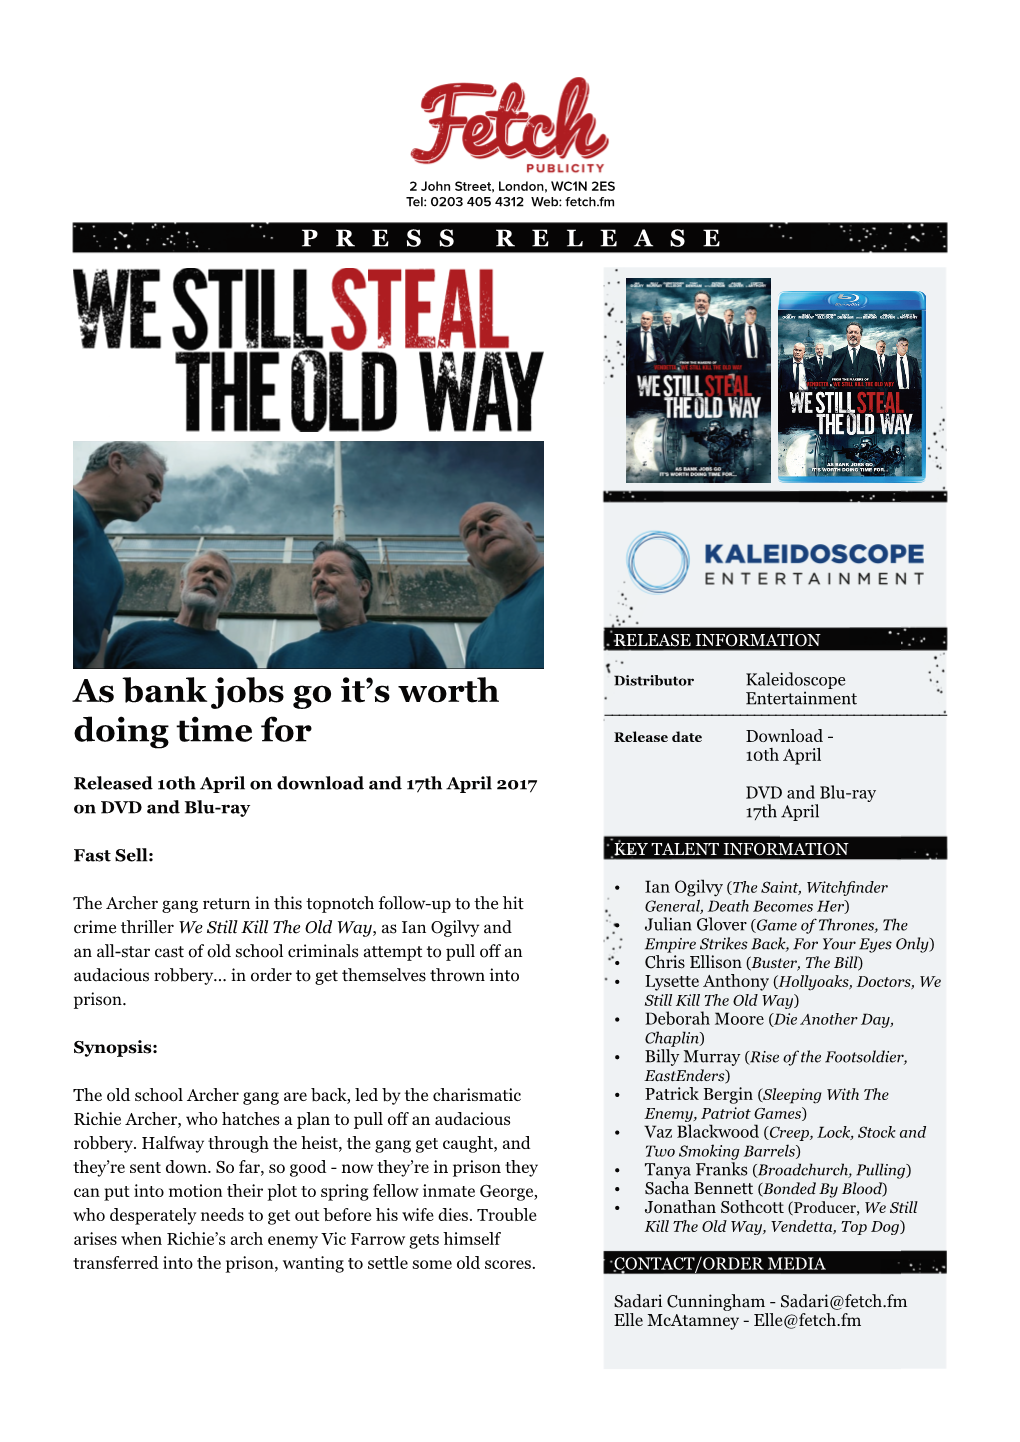 We Still Steal the Old Way Press Release Version 3.Indd